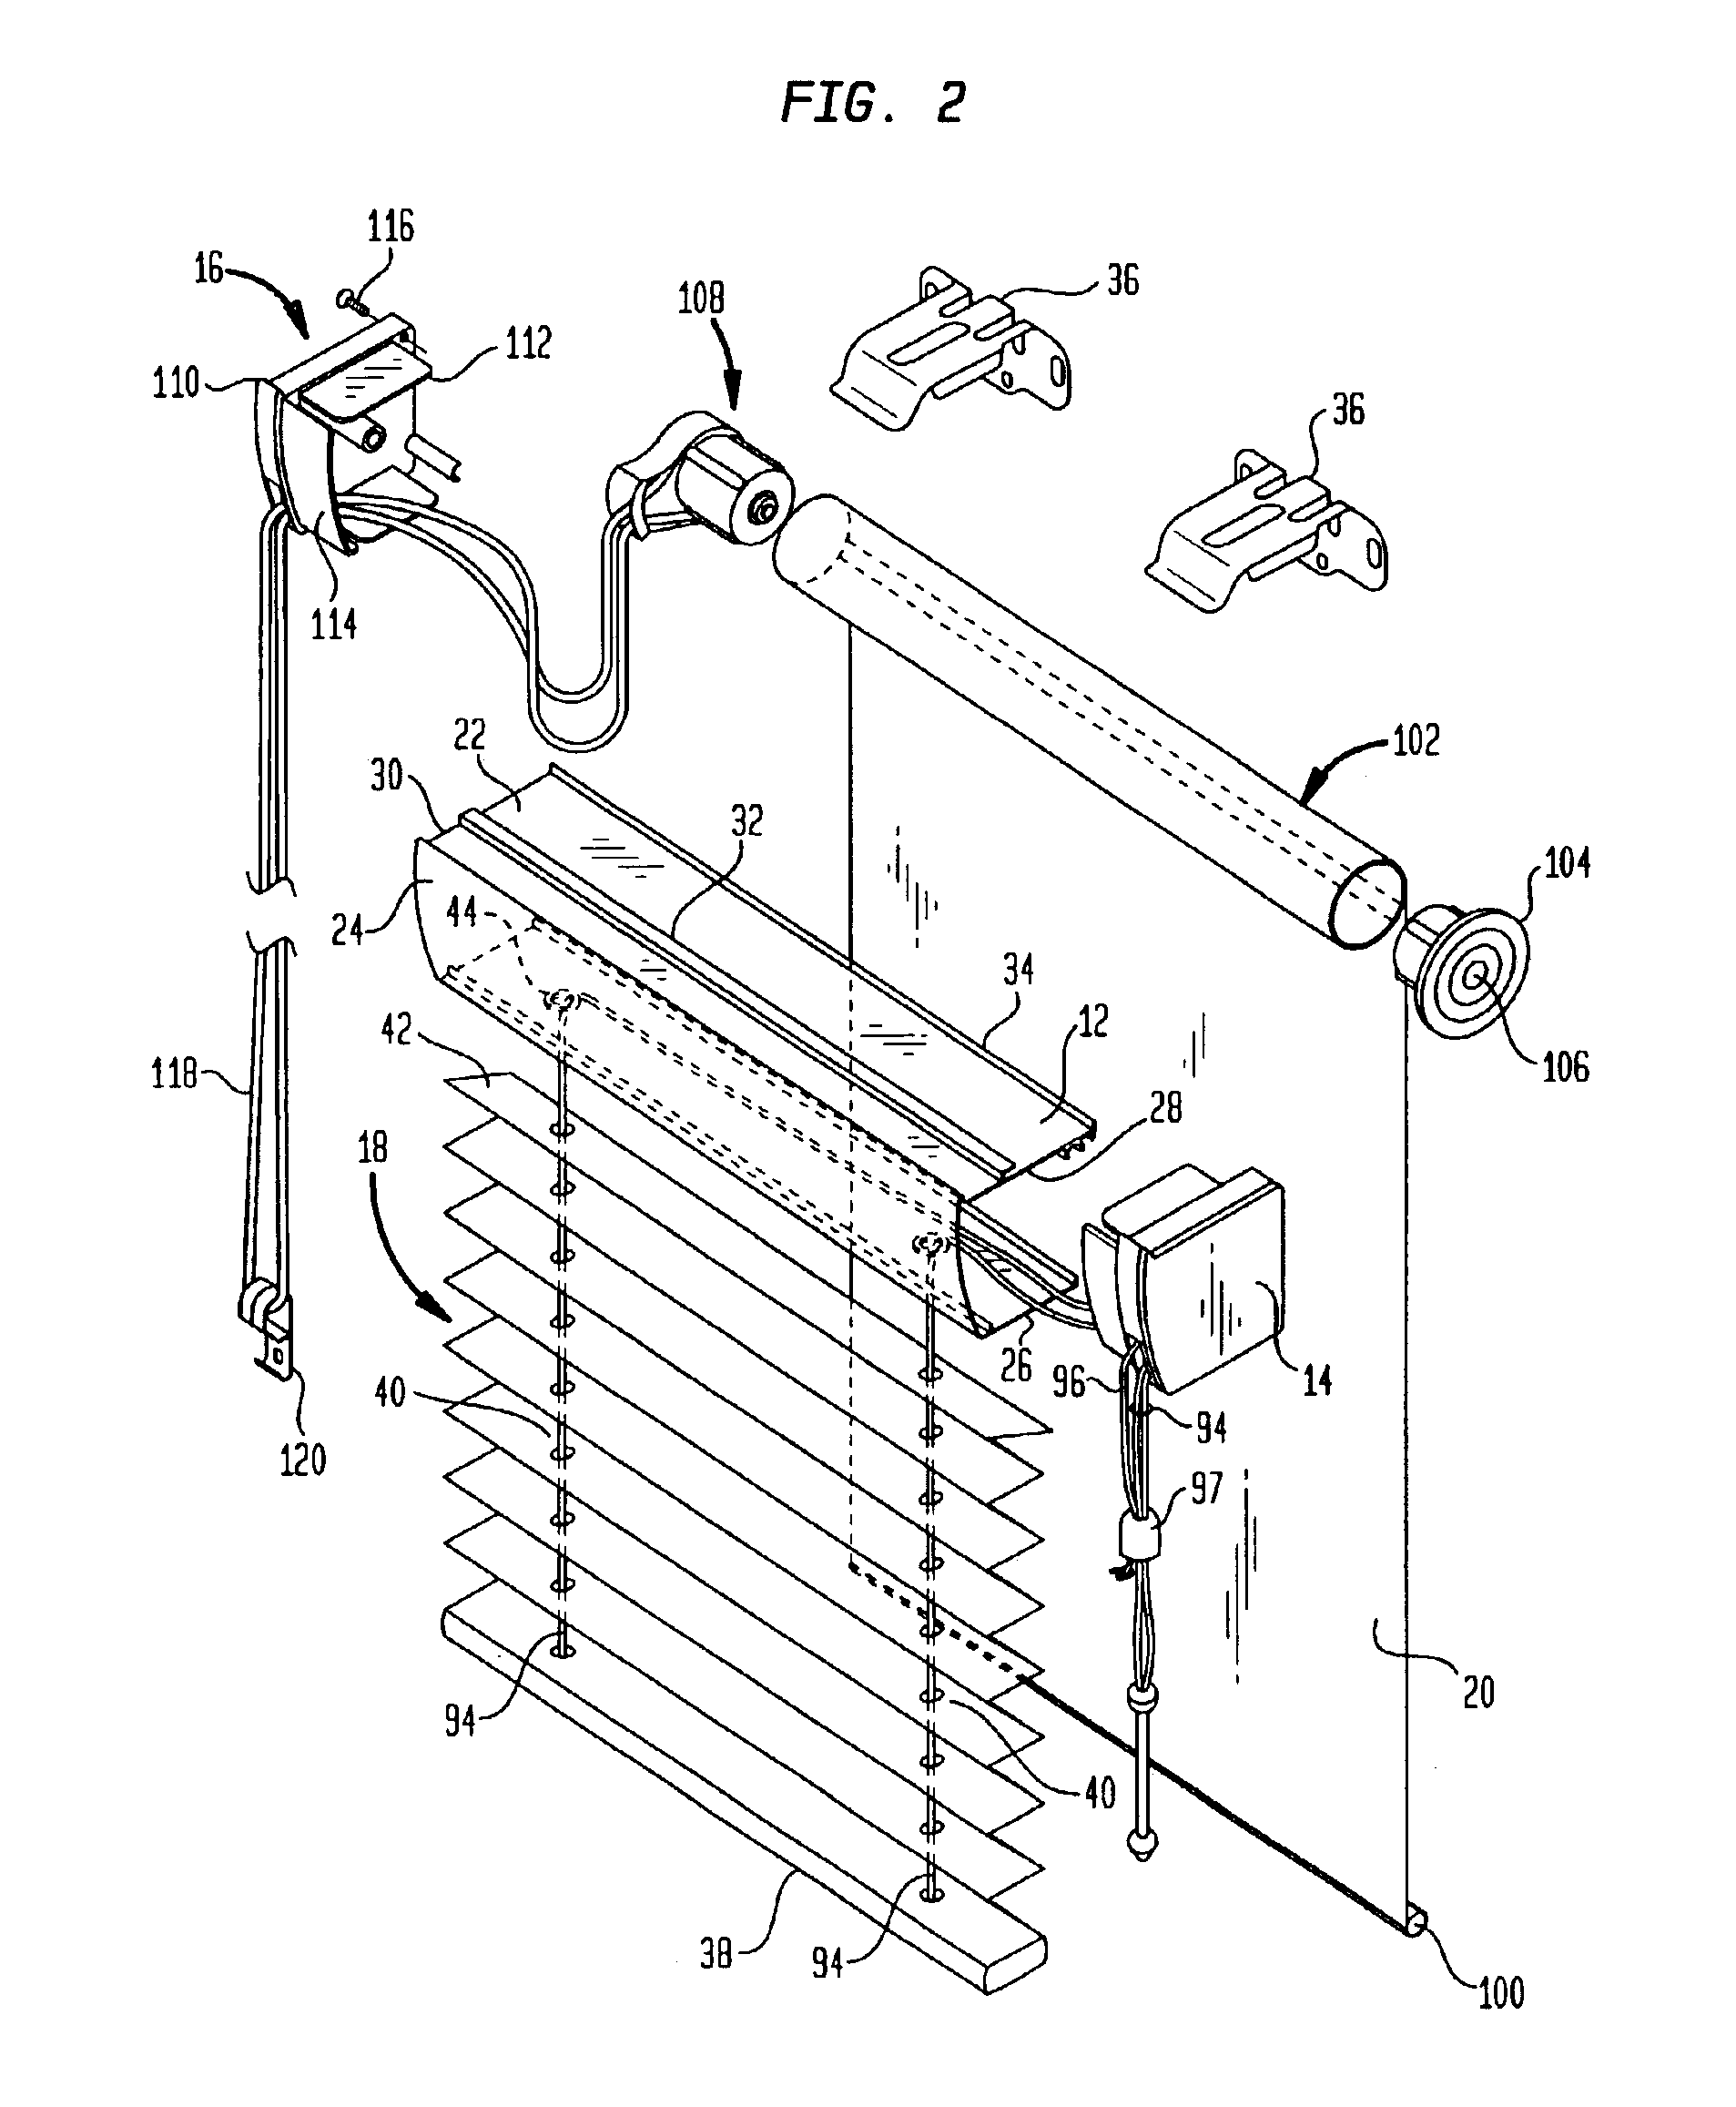 Double shade with modular end caps and method of assembling same